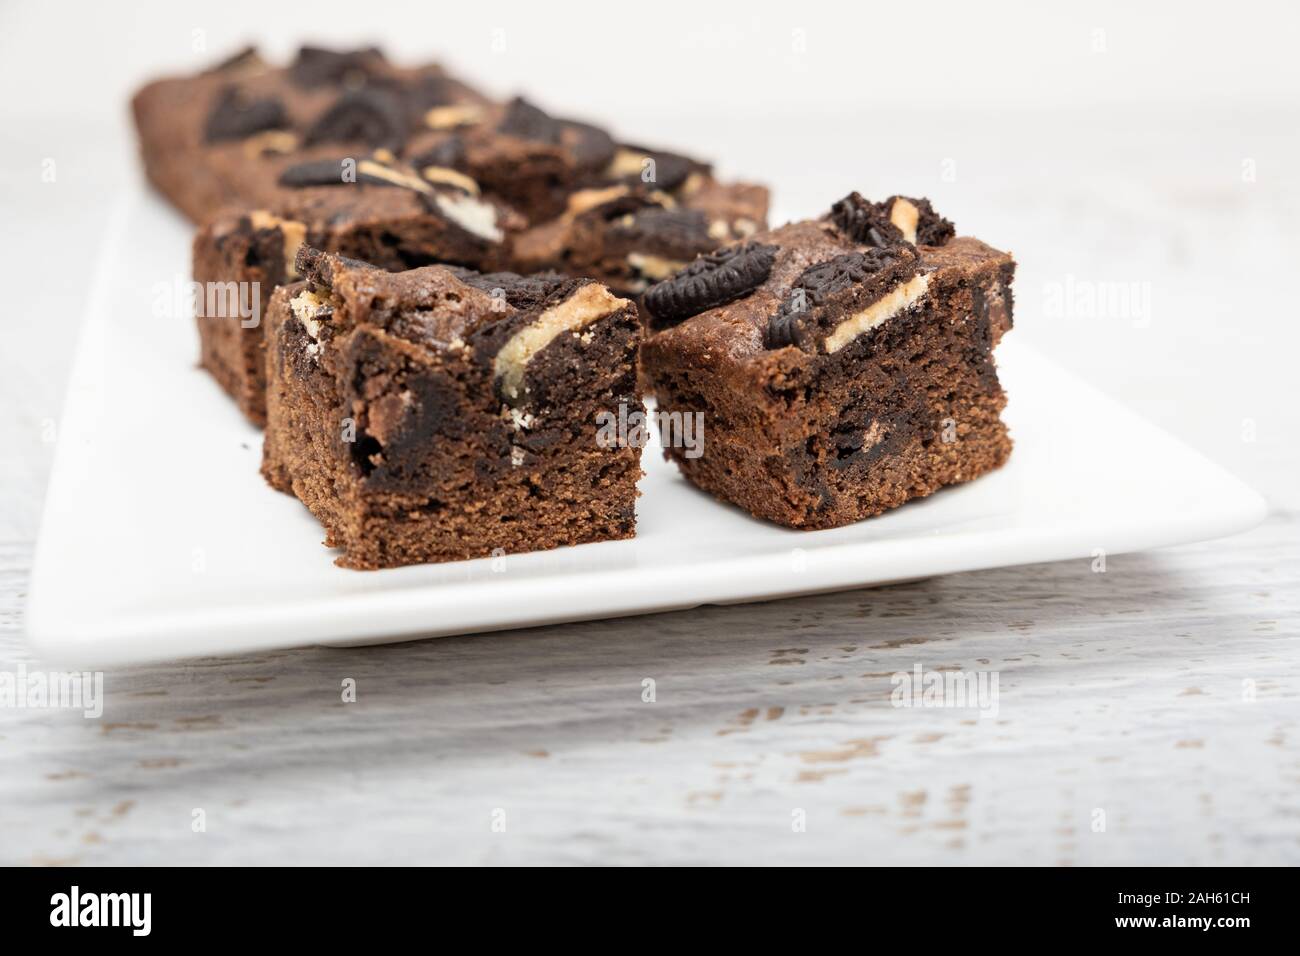 Homemade sweet cake with chocolate chips Stock Photo